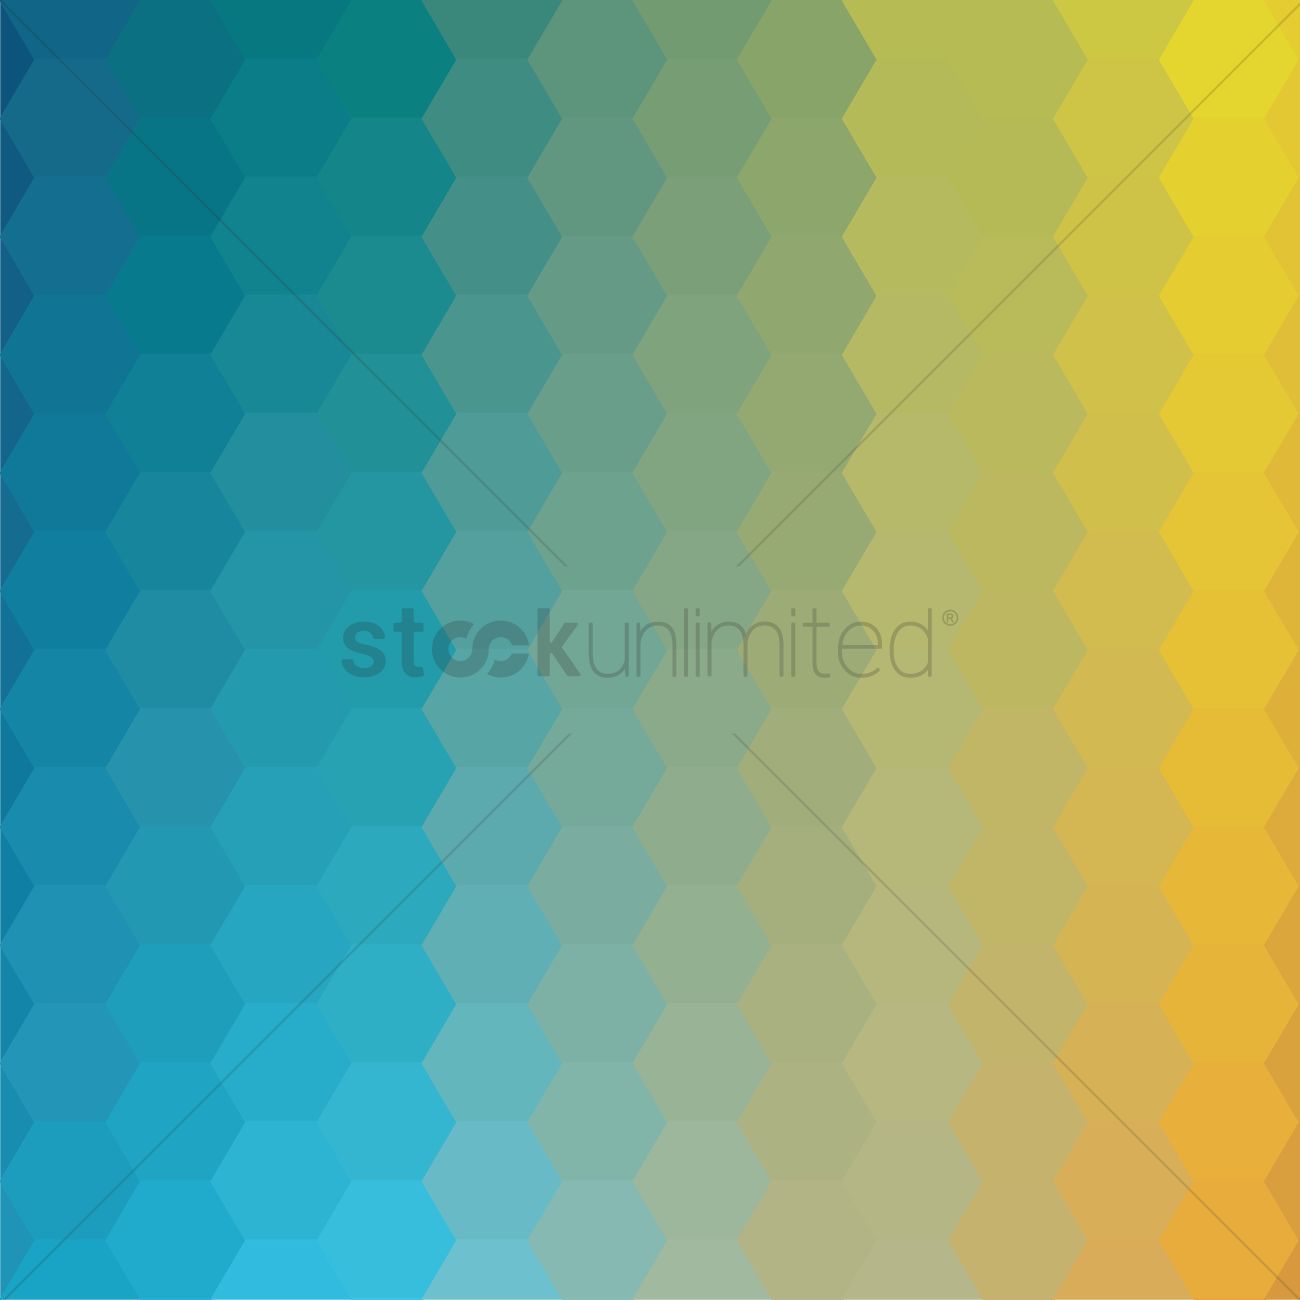 Octagon Background Vector Image Stockunlimited